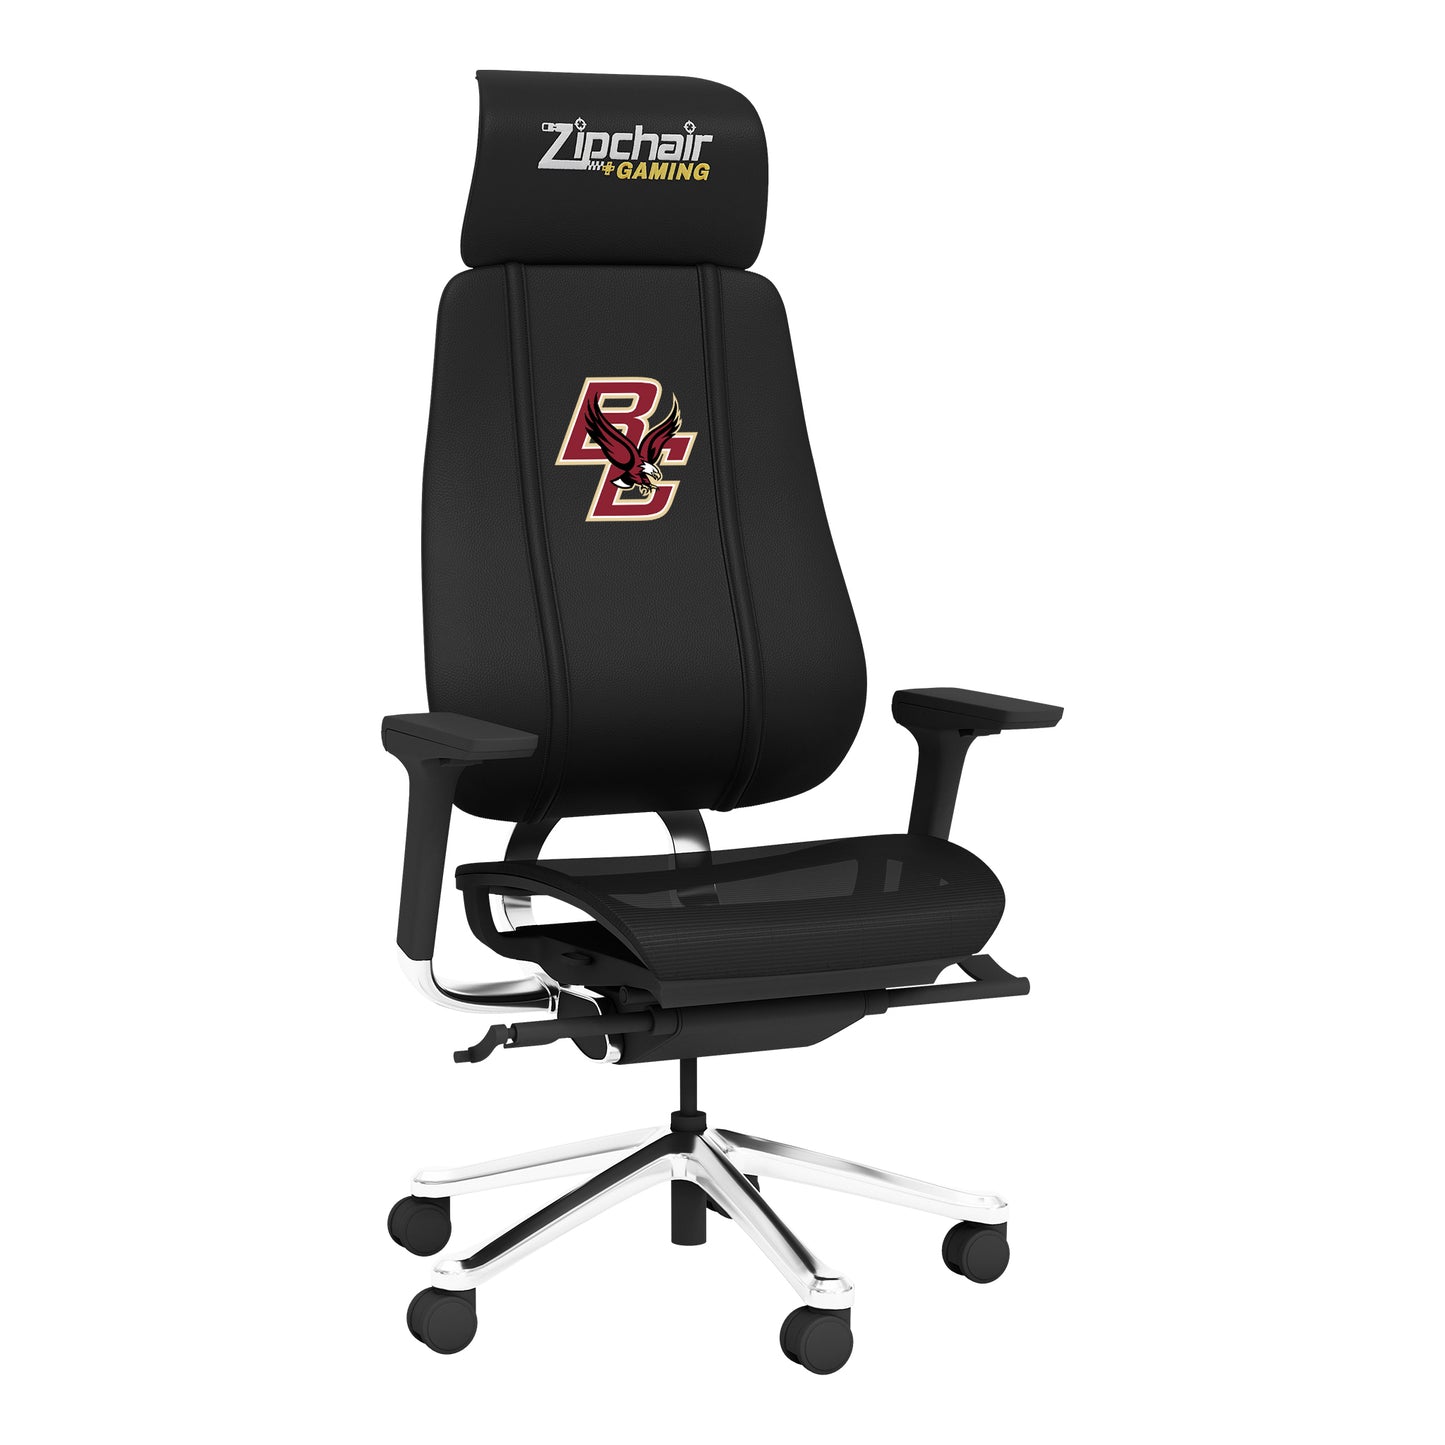 PhantomX Gaming Chair with Boston College Eagles Logo